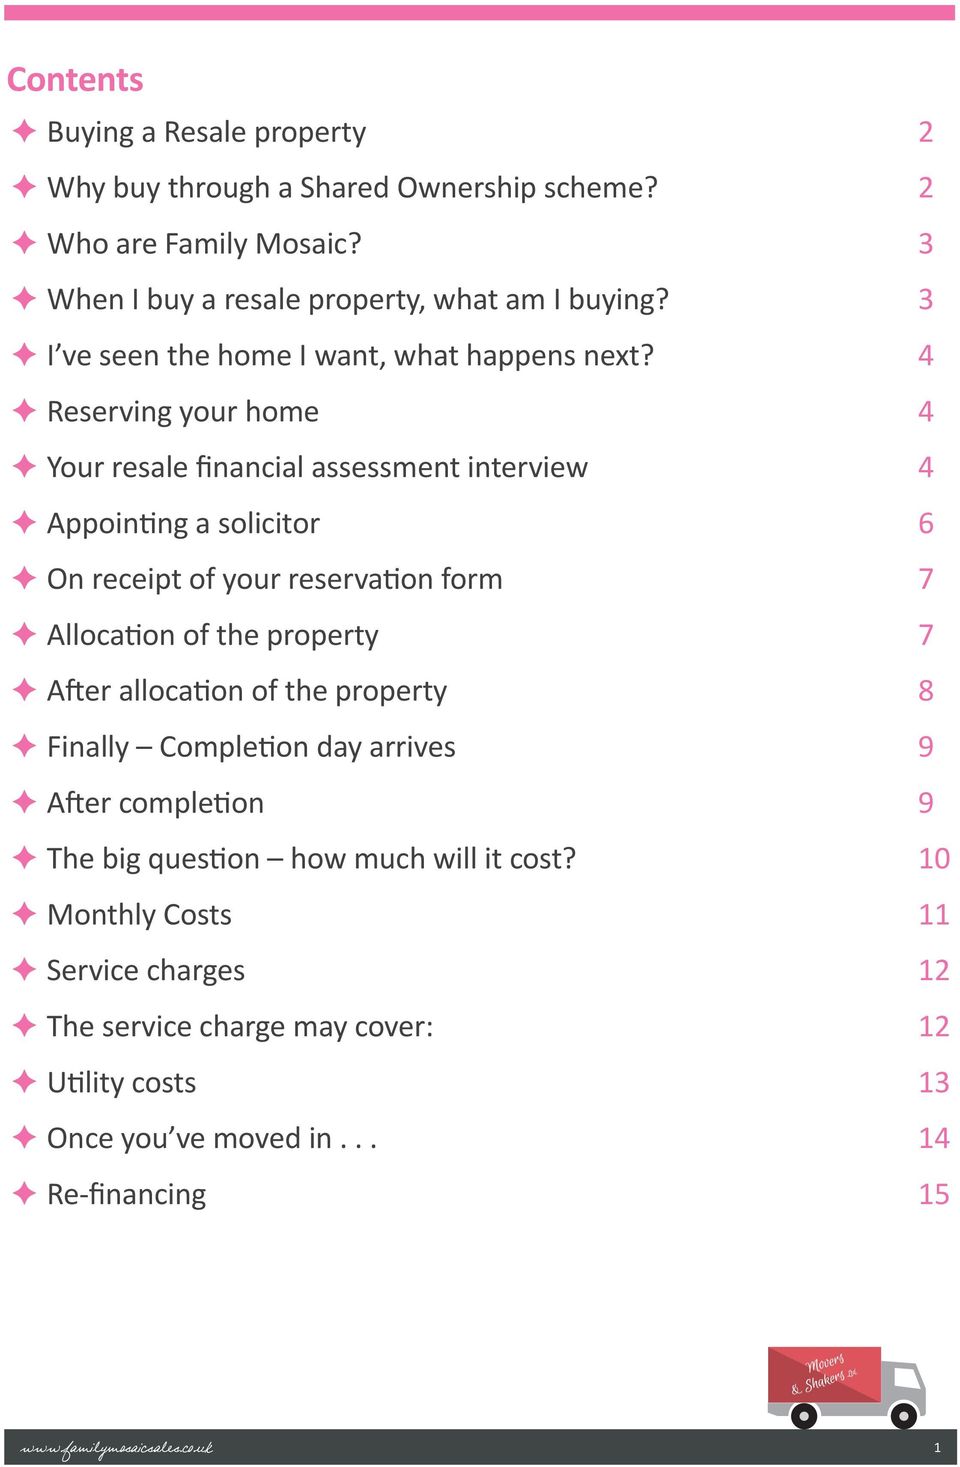 4 Reserving your home 4 Your resale financial assessment interview 4 Appointing a solicitor 6 On receipt of your reservation form 7 Allocation of the property 7